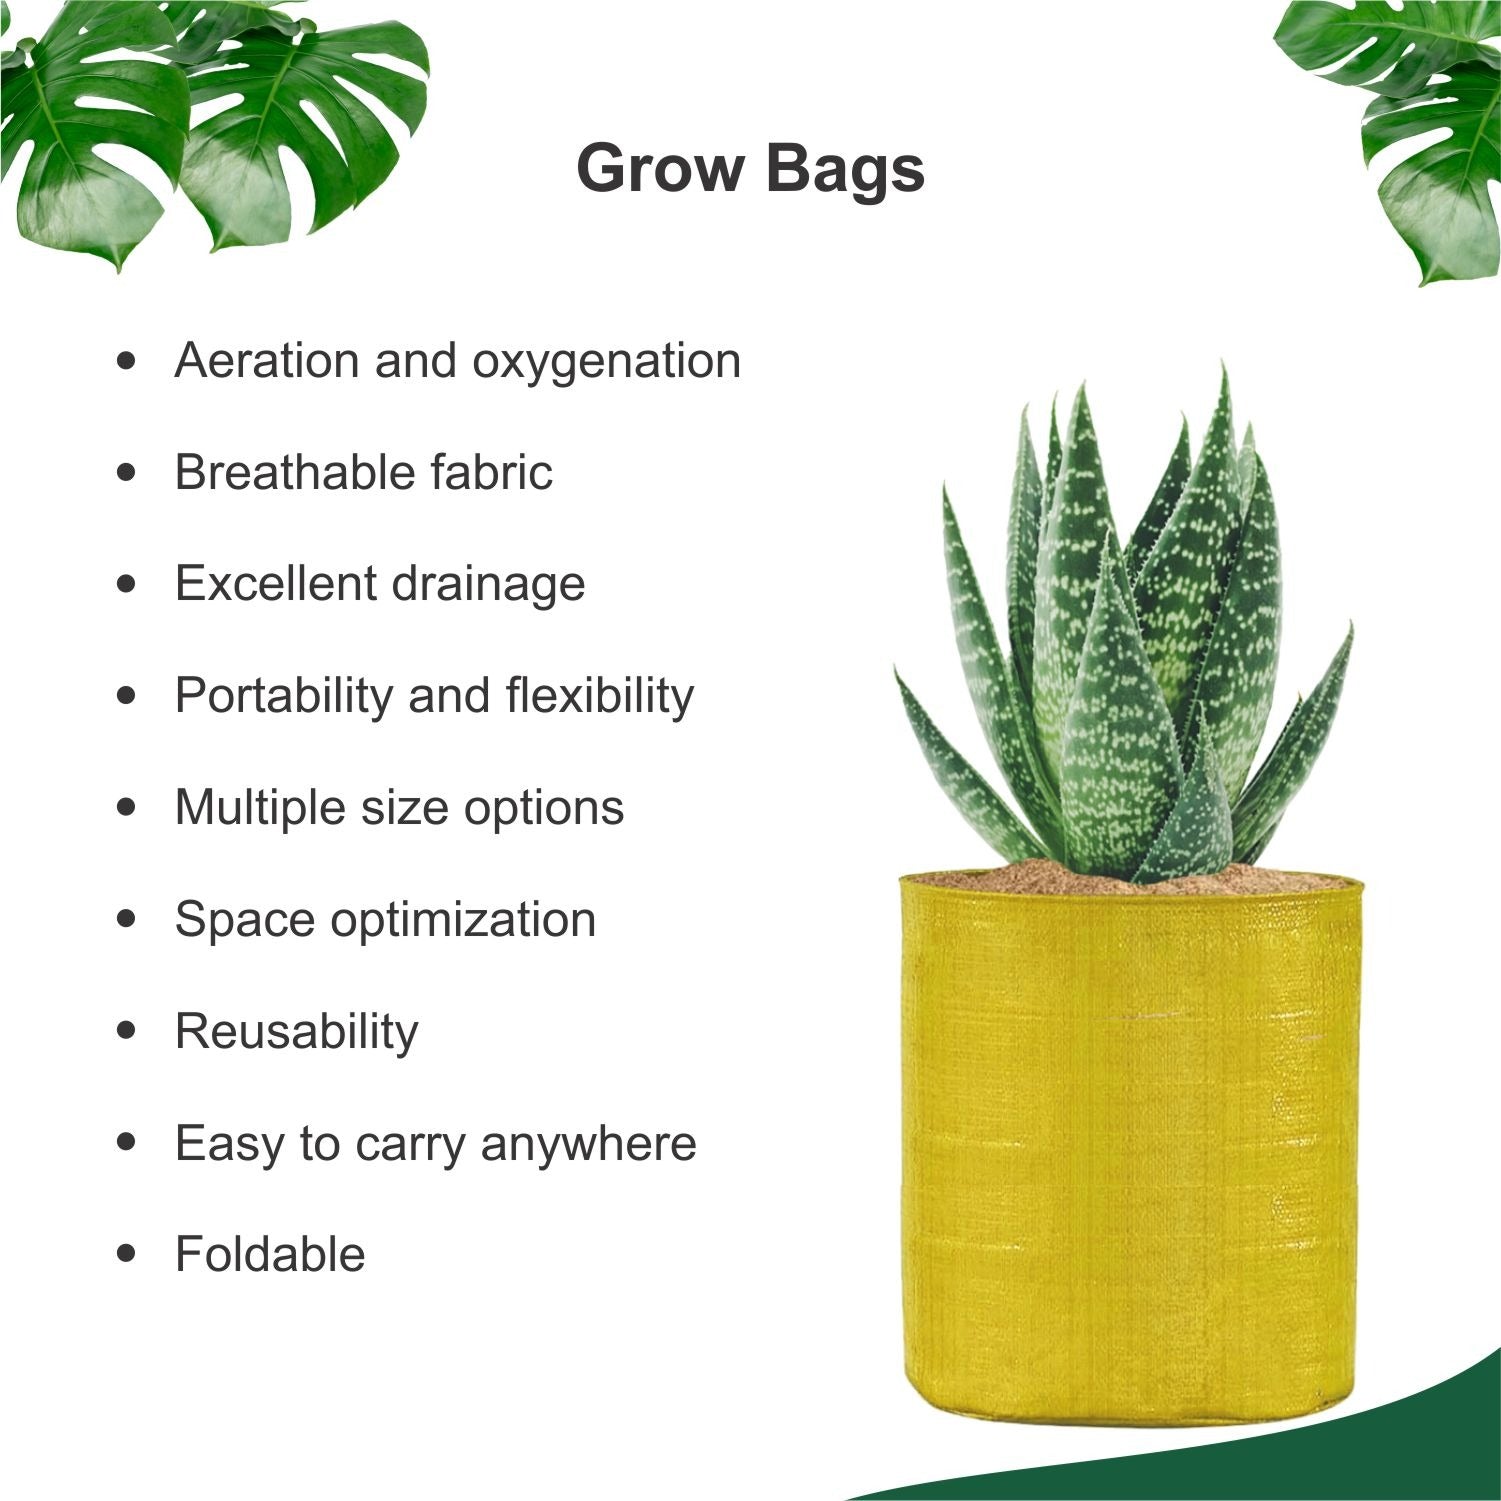 ONLY FOR ORGANIC - HDPE UV Treated Green Grow Bags for Home/Commercial  Gardening (Size-9x9 inch) - Pack of 5 : Amazon.in: Garden & Outdoors